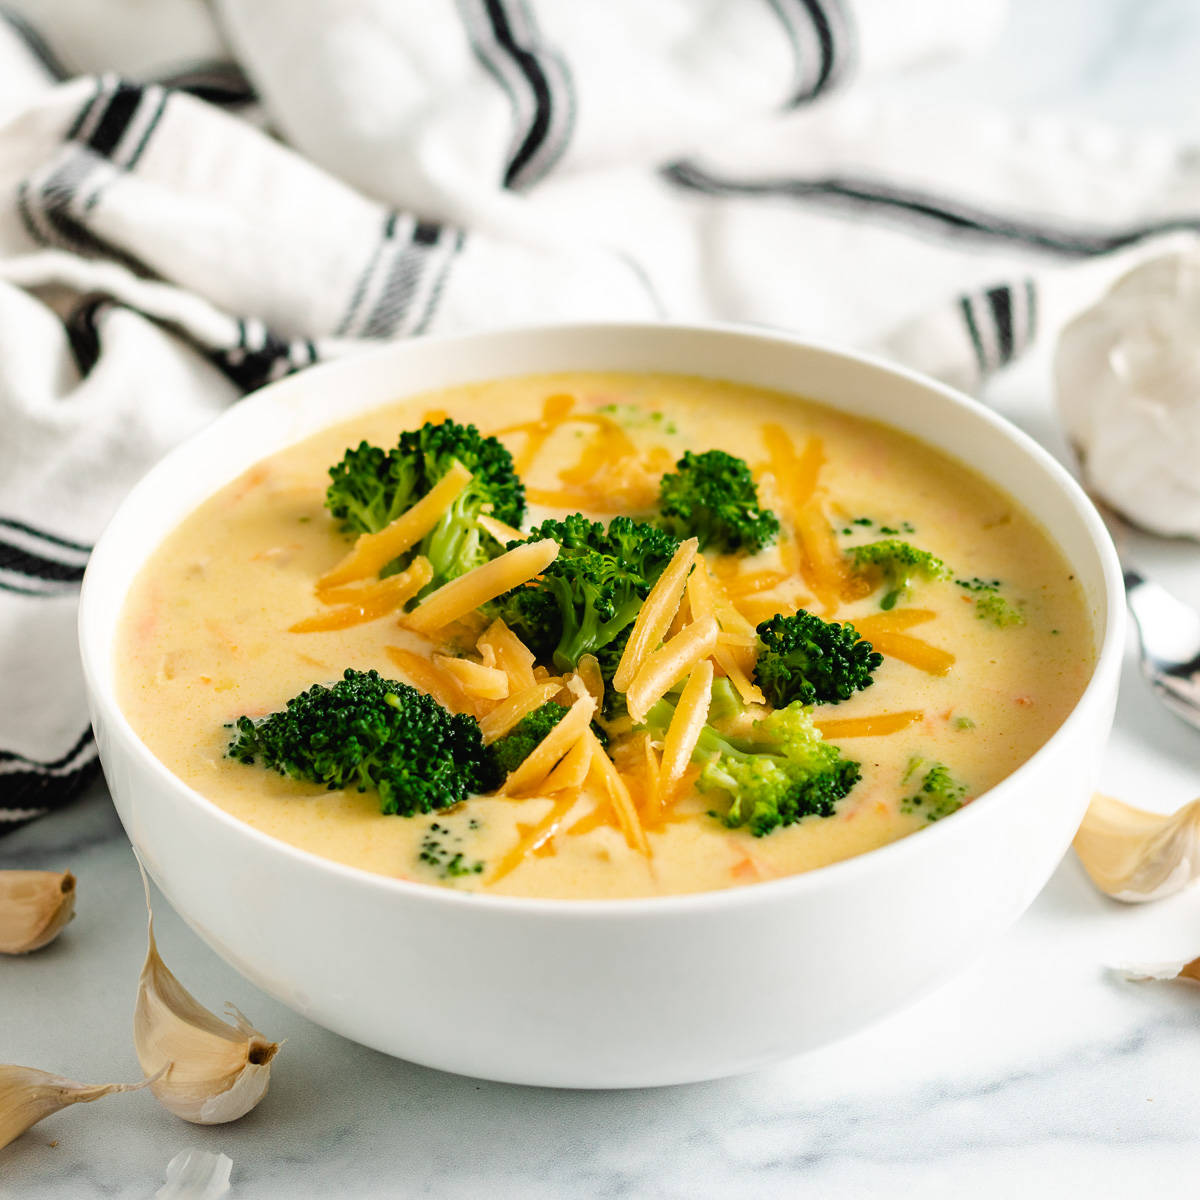 Delectable Broccoli Cheddar Soup in a Bowl Wallpaper